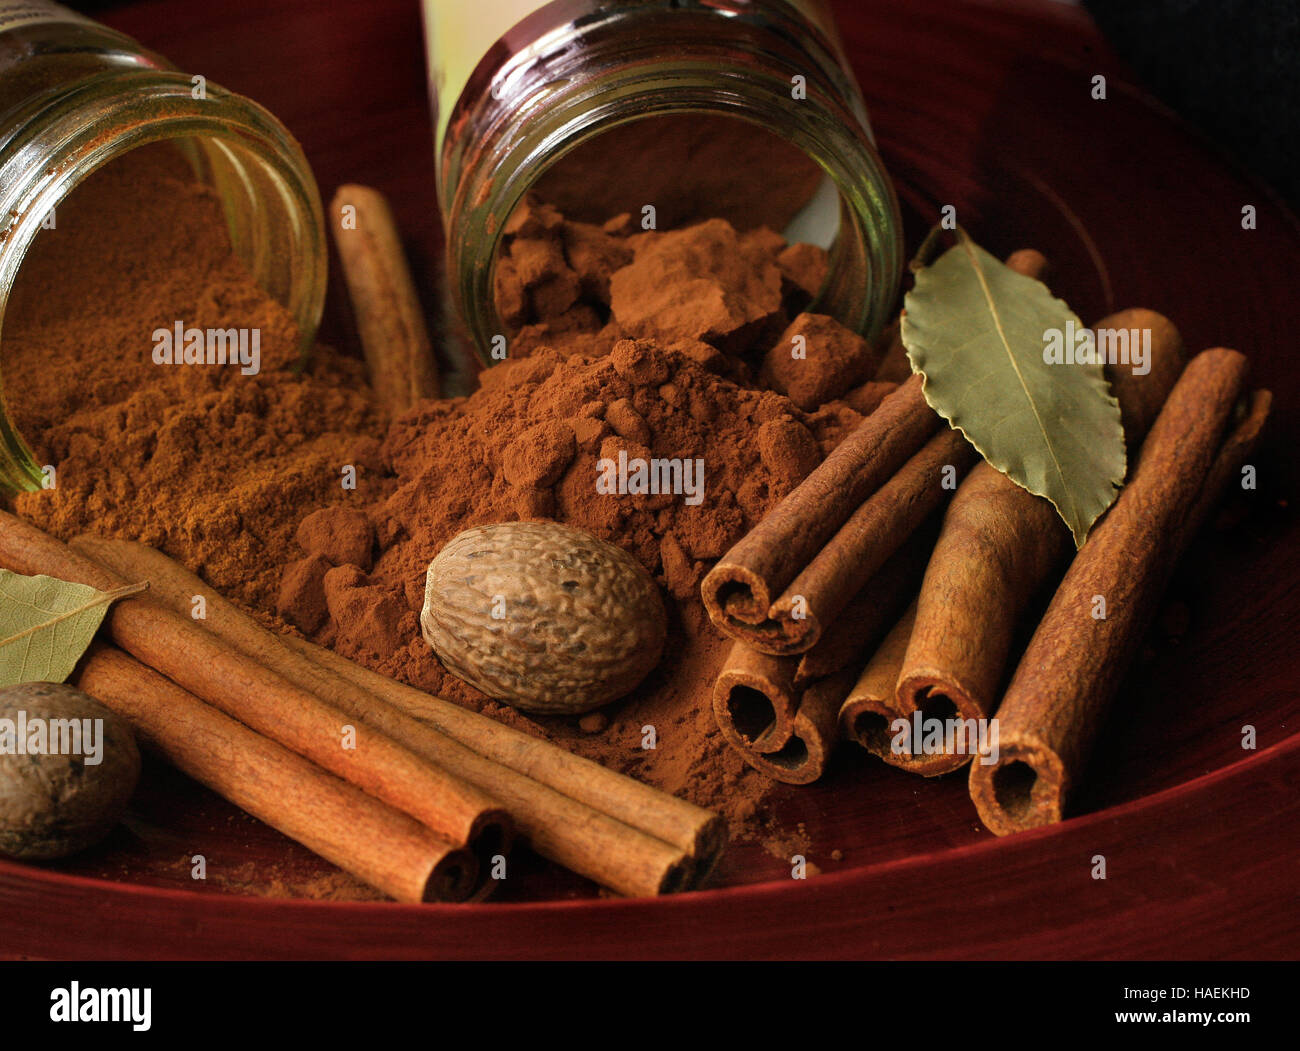 Cinnamon, cinnamon stick, nutmeg and bay leaves are together in this photo  of holiday spices Stock Photo - Alamy